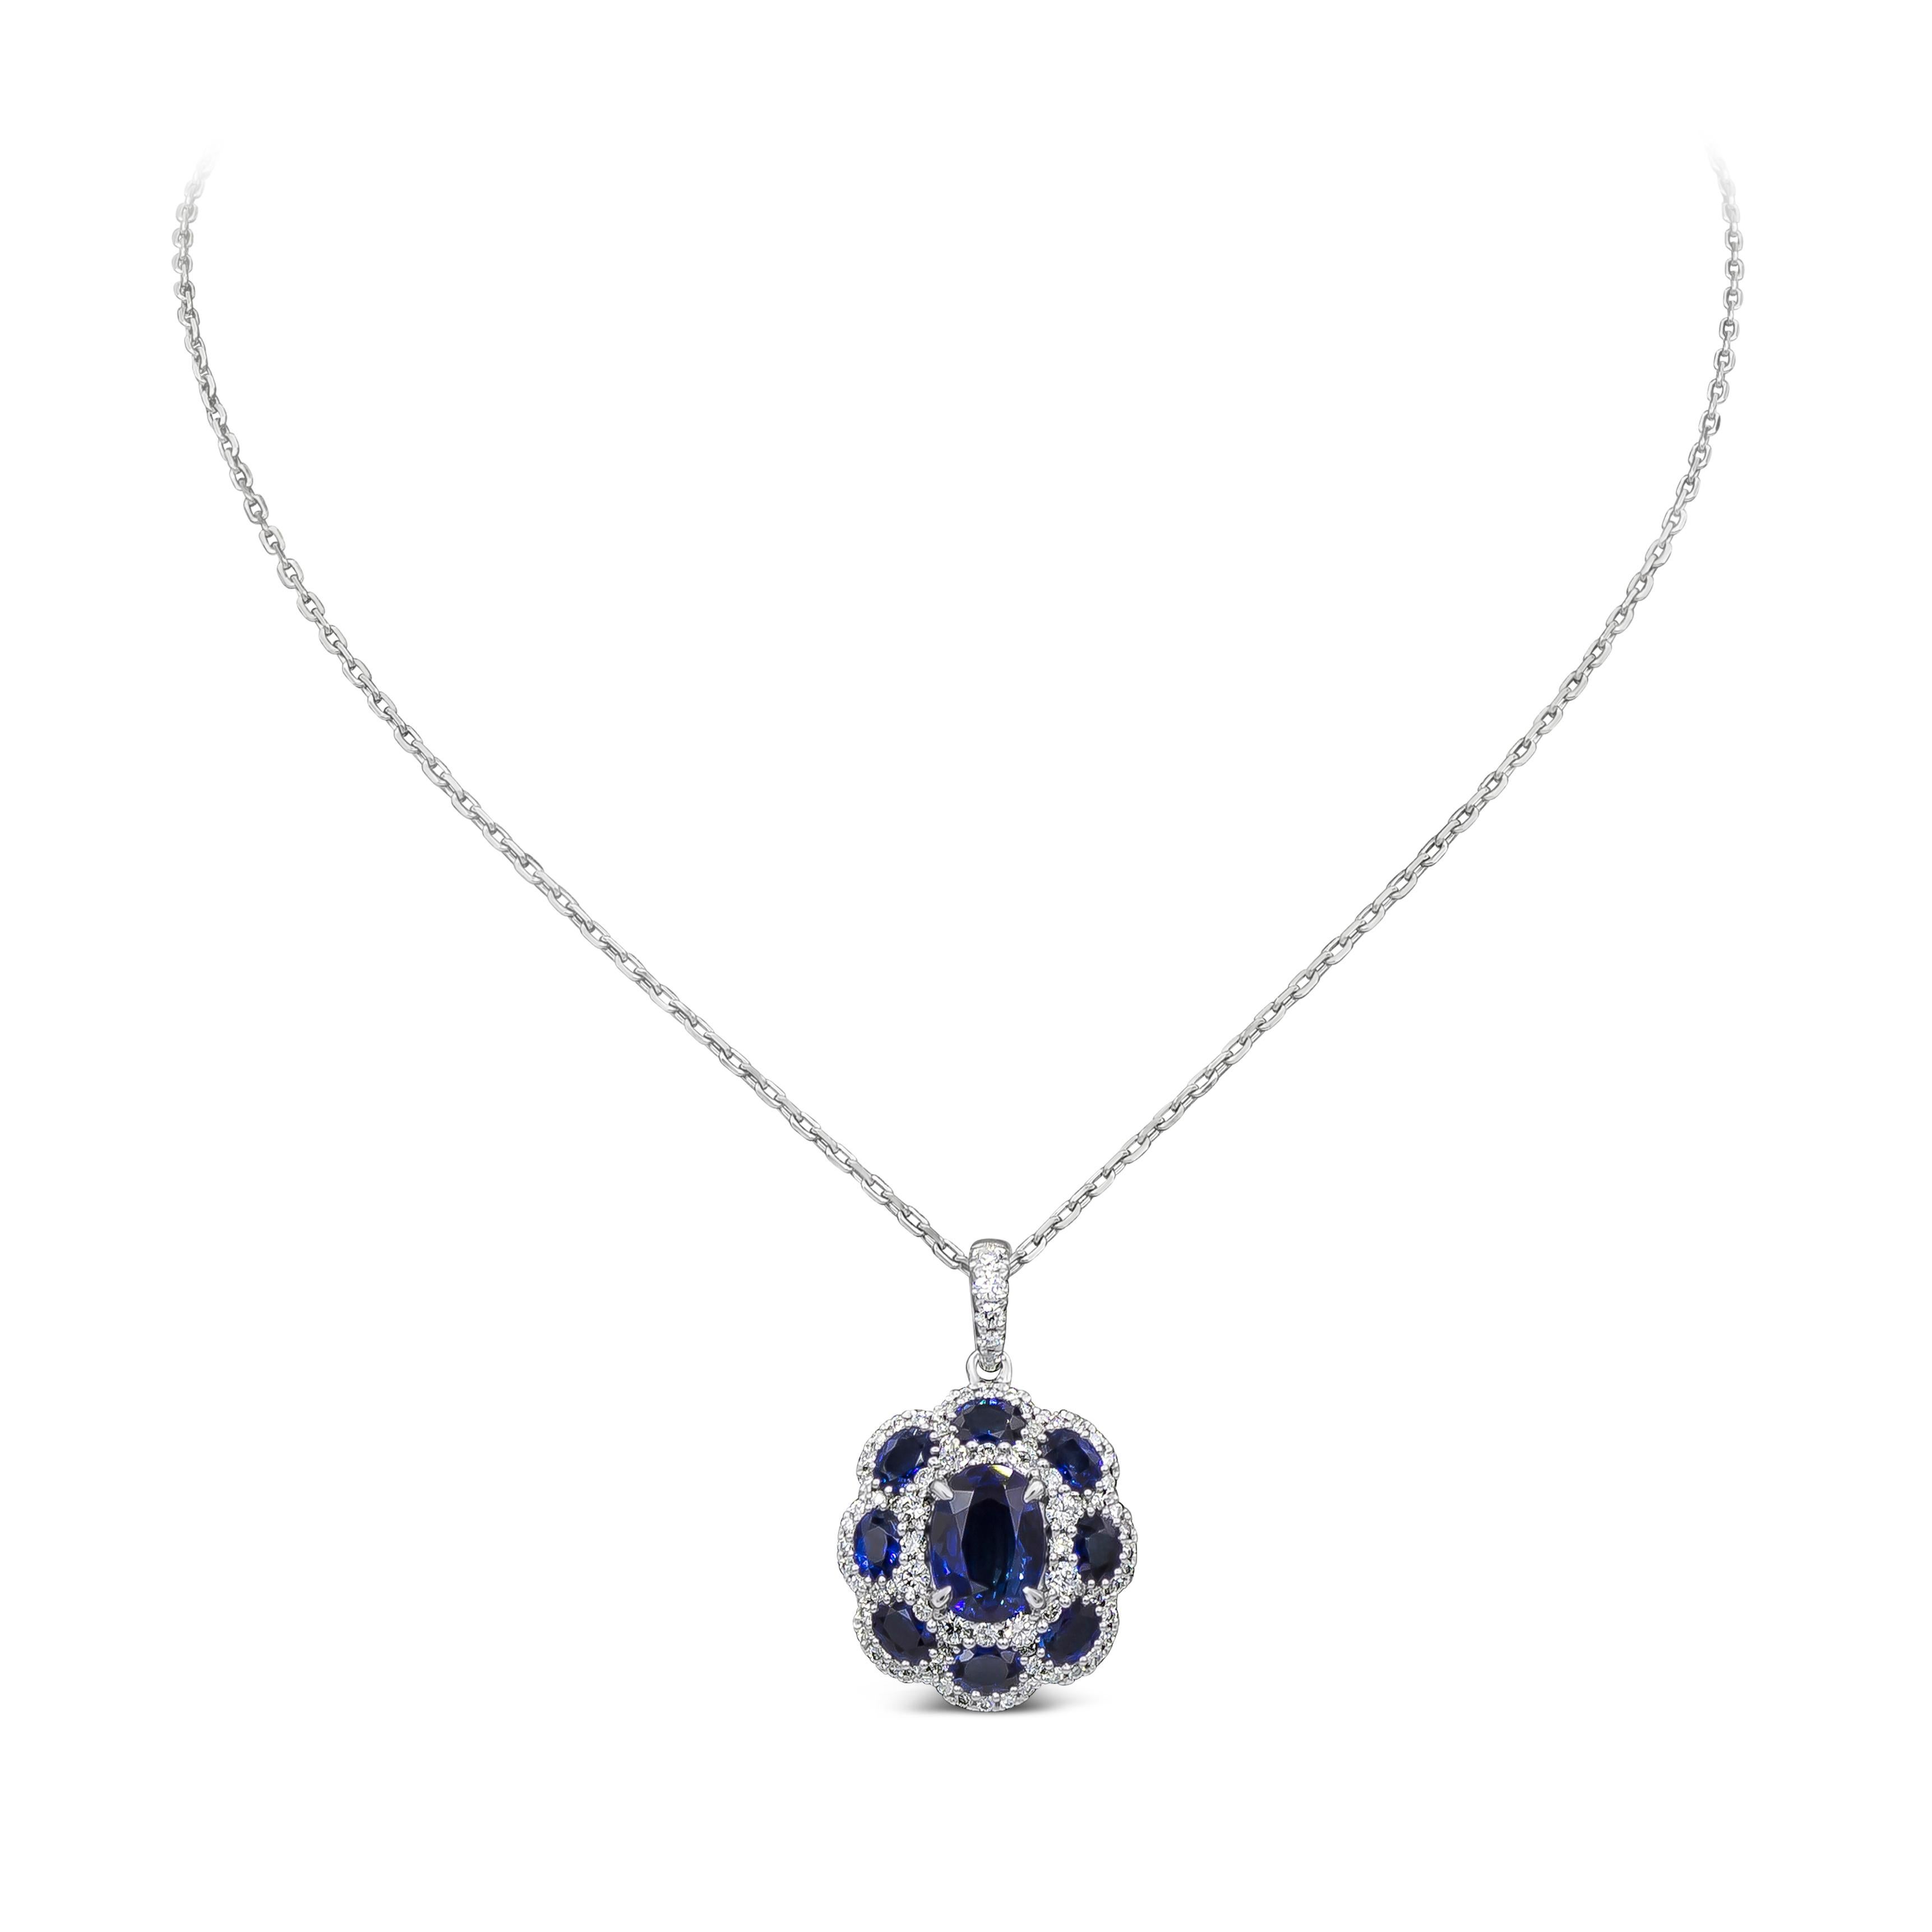 A fashionable piece of jewelry showcasing a 2.12 carats oval cut blue sapphire center stone, surrounded by smaller blue sapphires 1.76 carats in a floral motif style. Finished with brilliant diamond accents weighing 0.68 carats total. Suspended on a